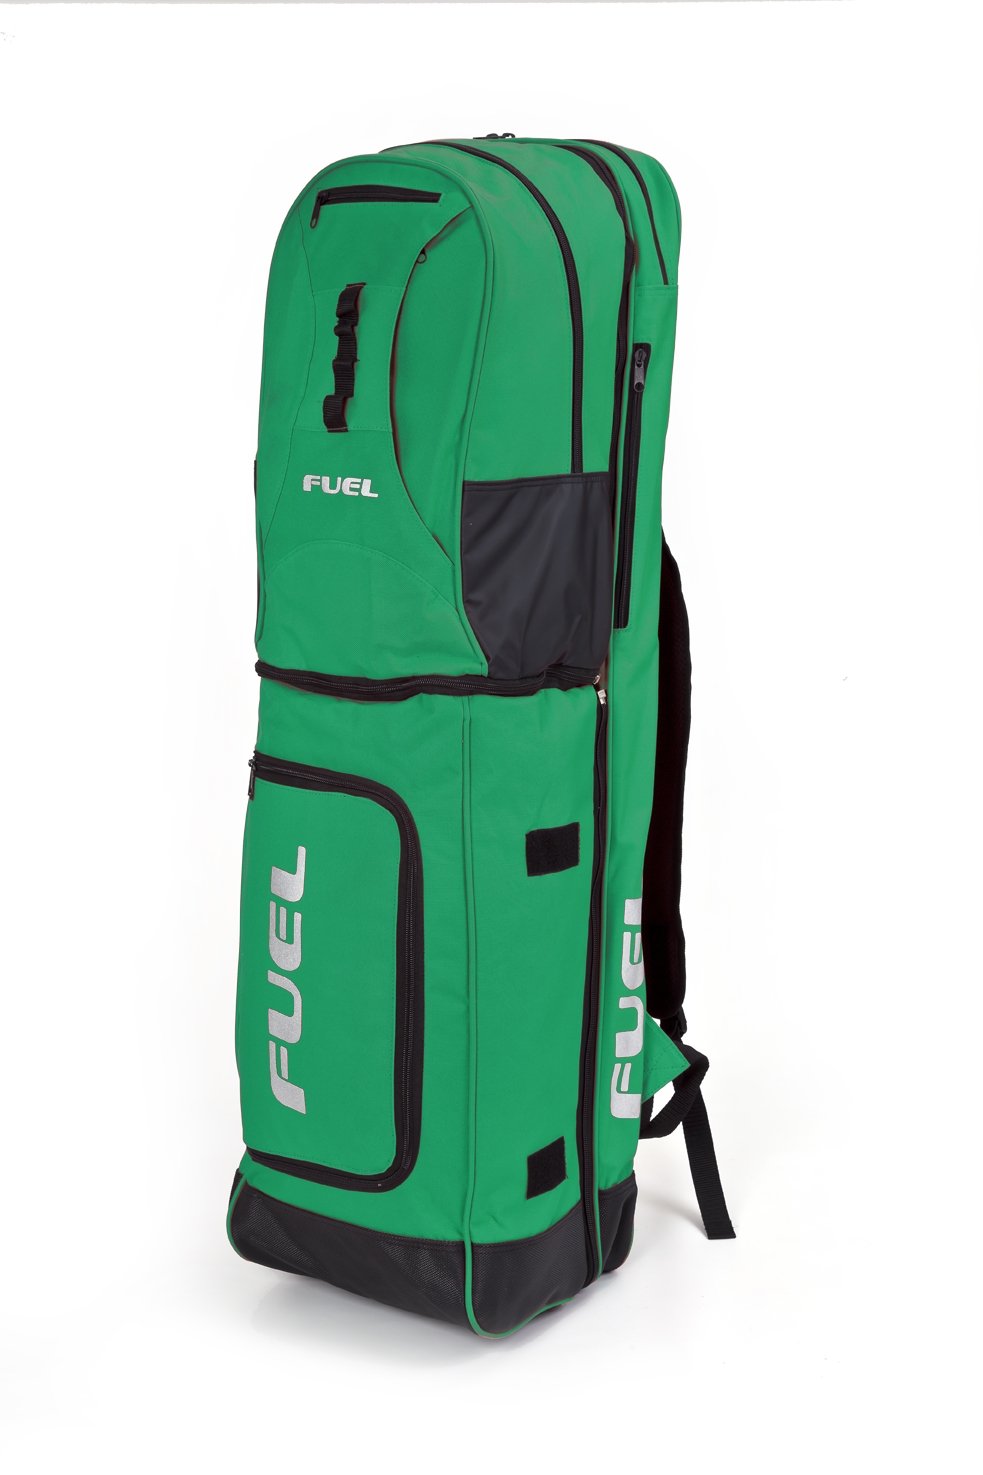 SFHC FUEL 3 in 1 Stick Bag - The Jerry Can